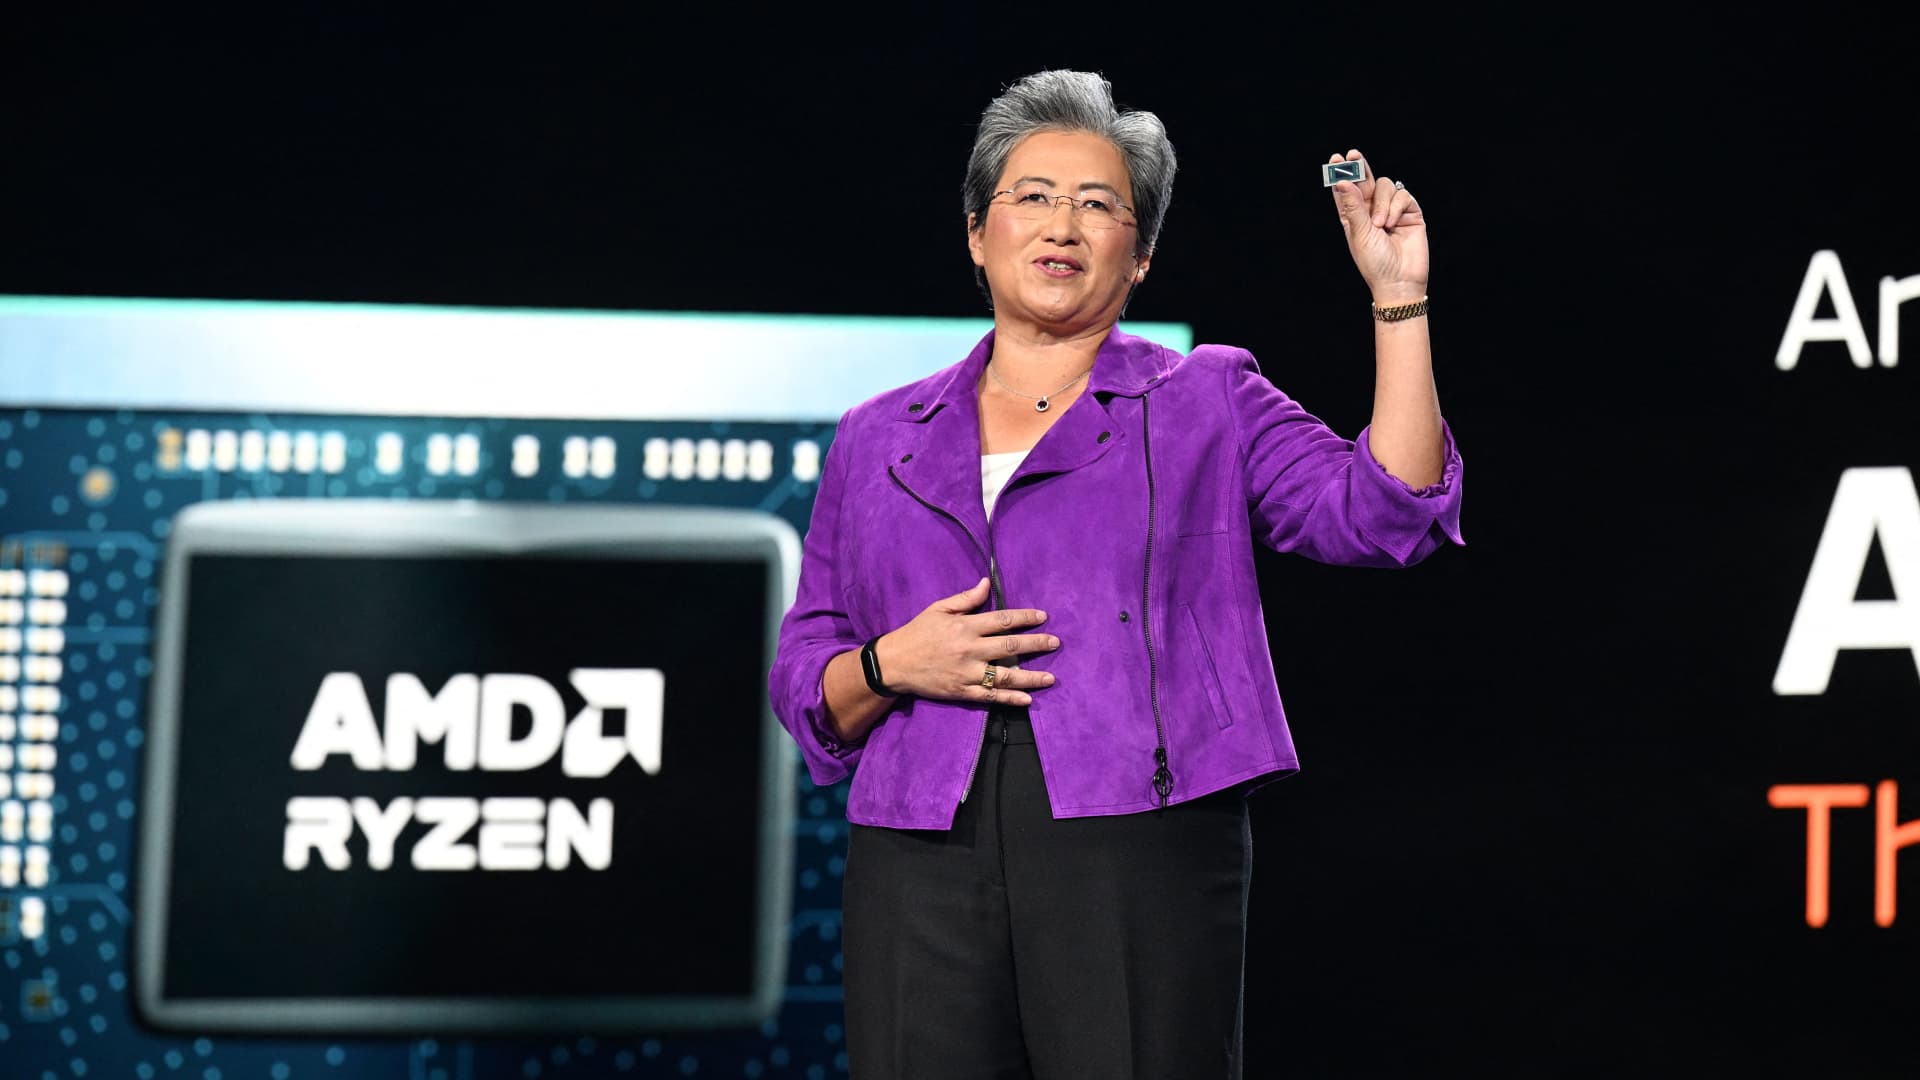 AMD beats on sales and profit but warns of a 10% revenue decline in Q1 - CNBC (Picture 1)